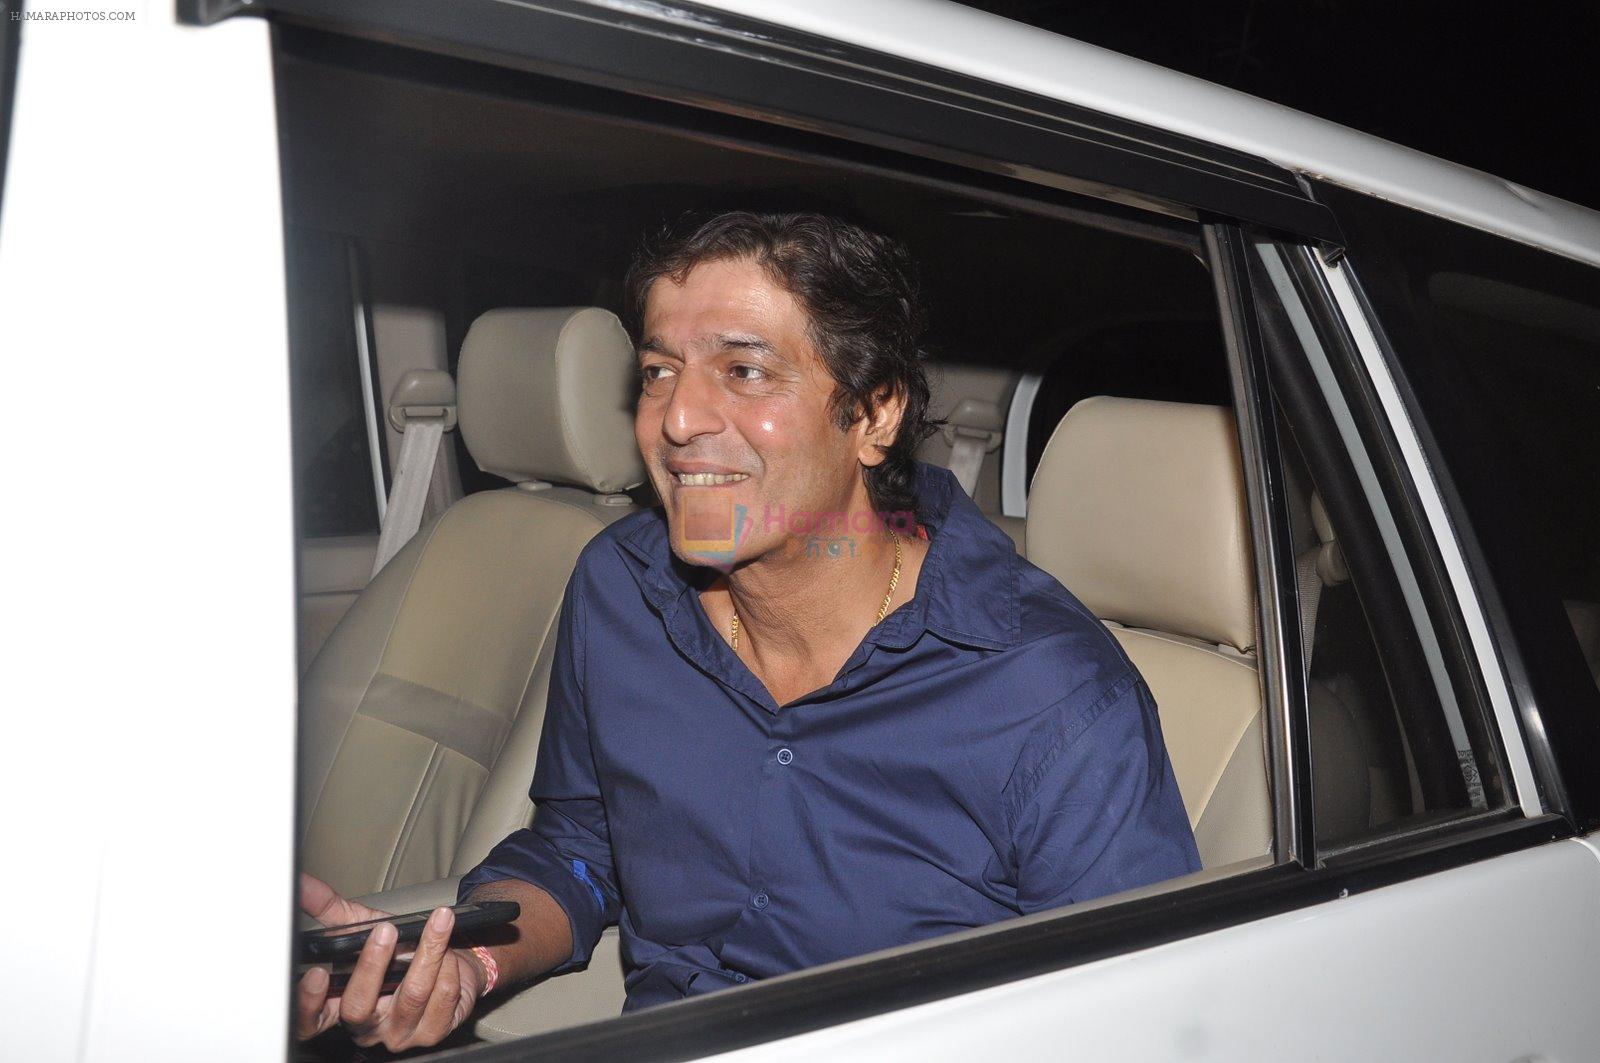 Chunky Pandey at Salman's bday in Panvel farm House on 26th Dec 2014